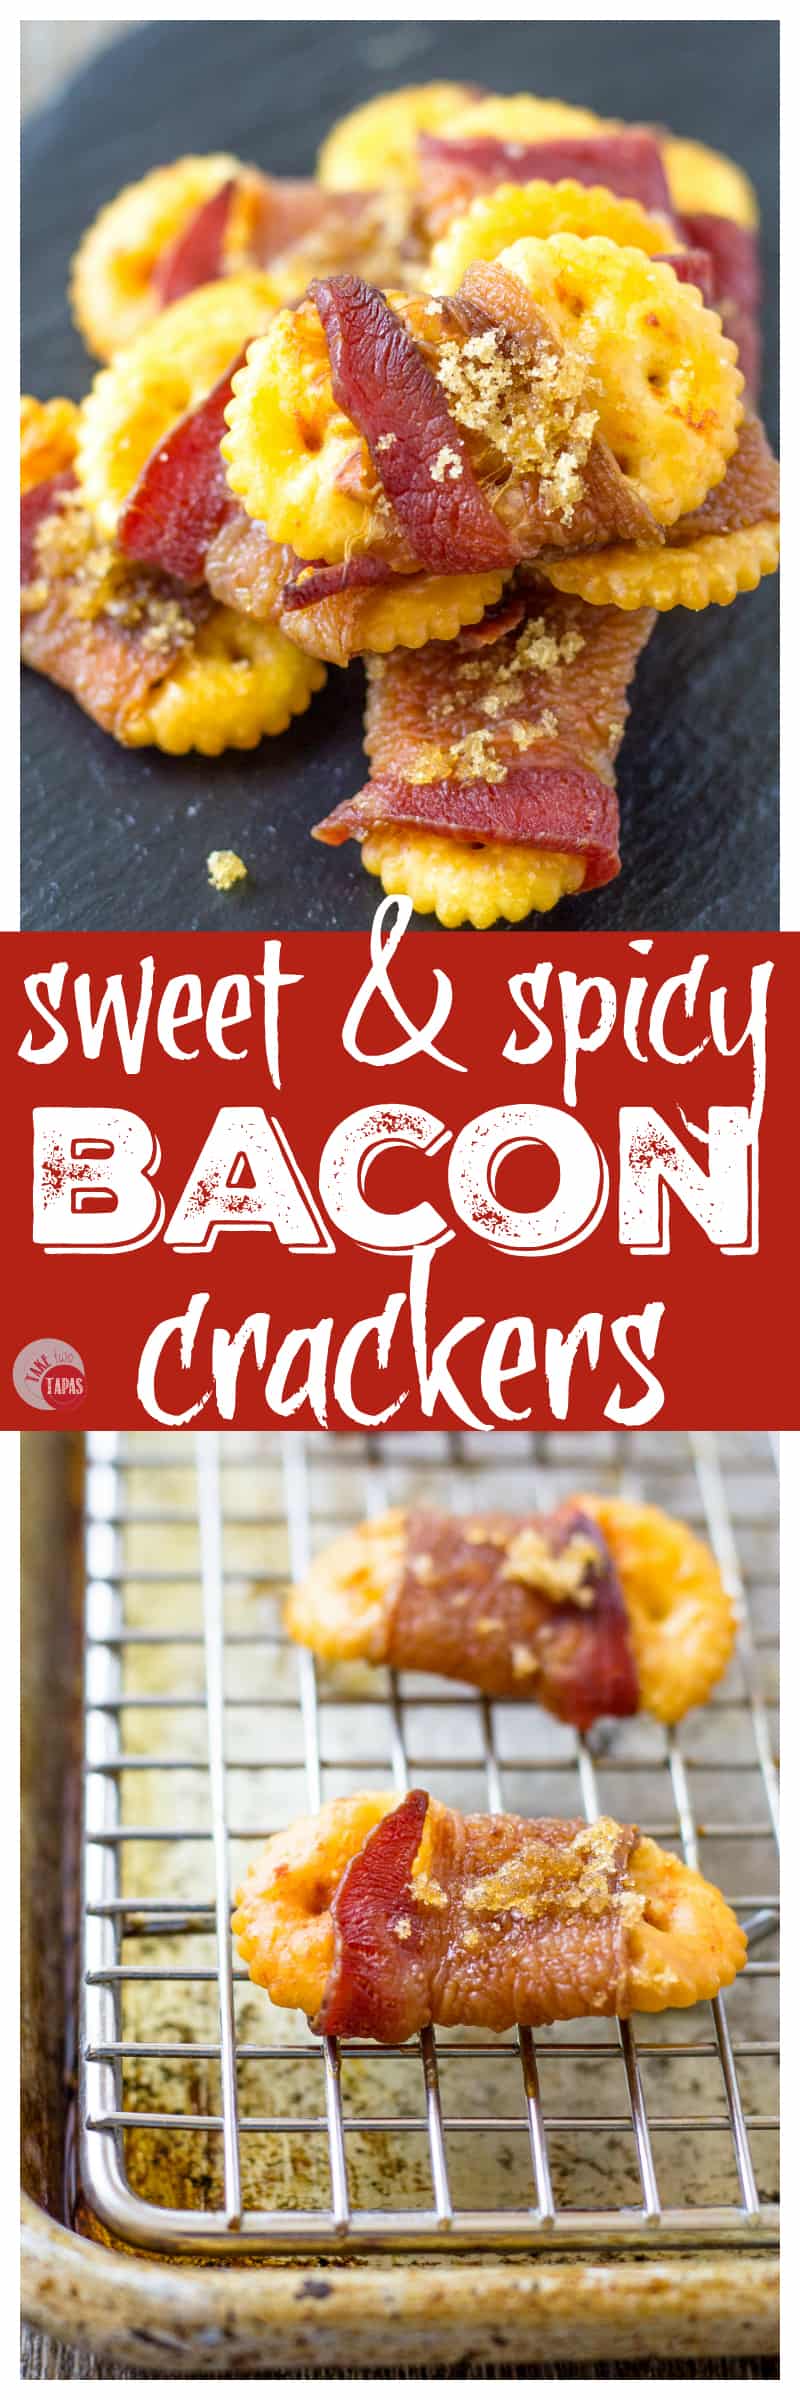 Pinterest collage image with text "sweet & spicy Bacon crackers"